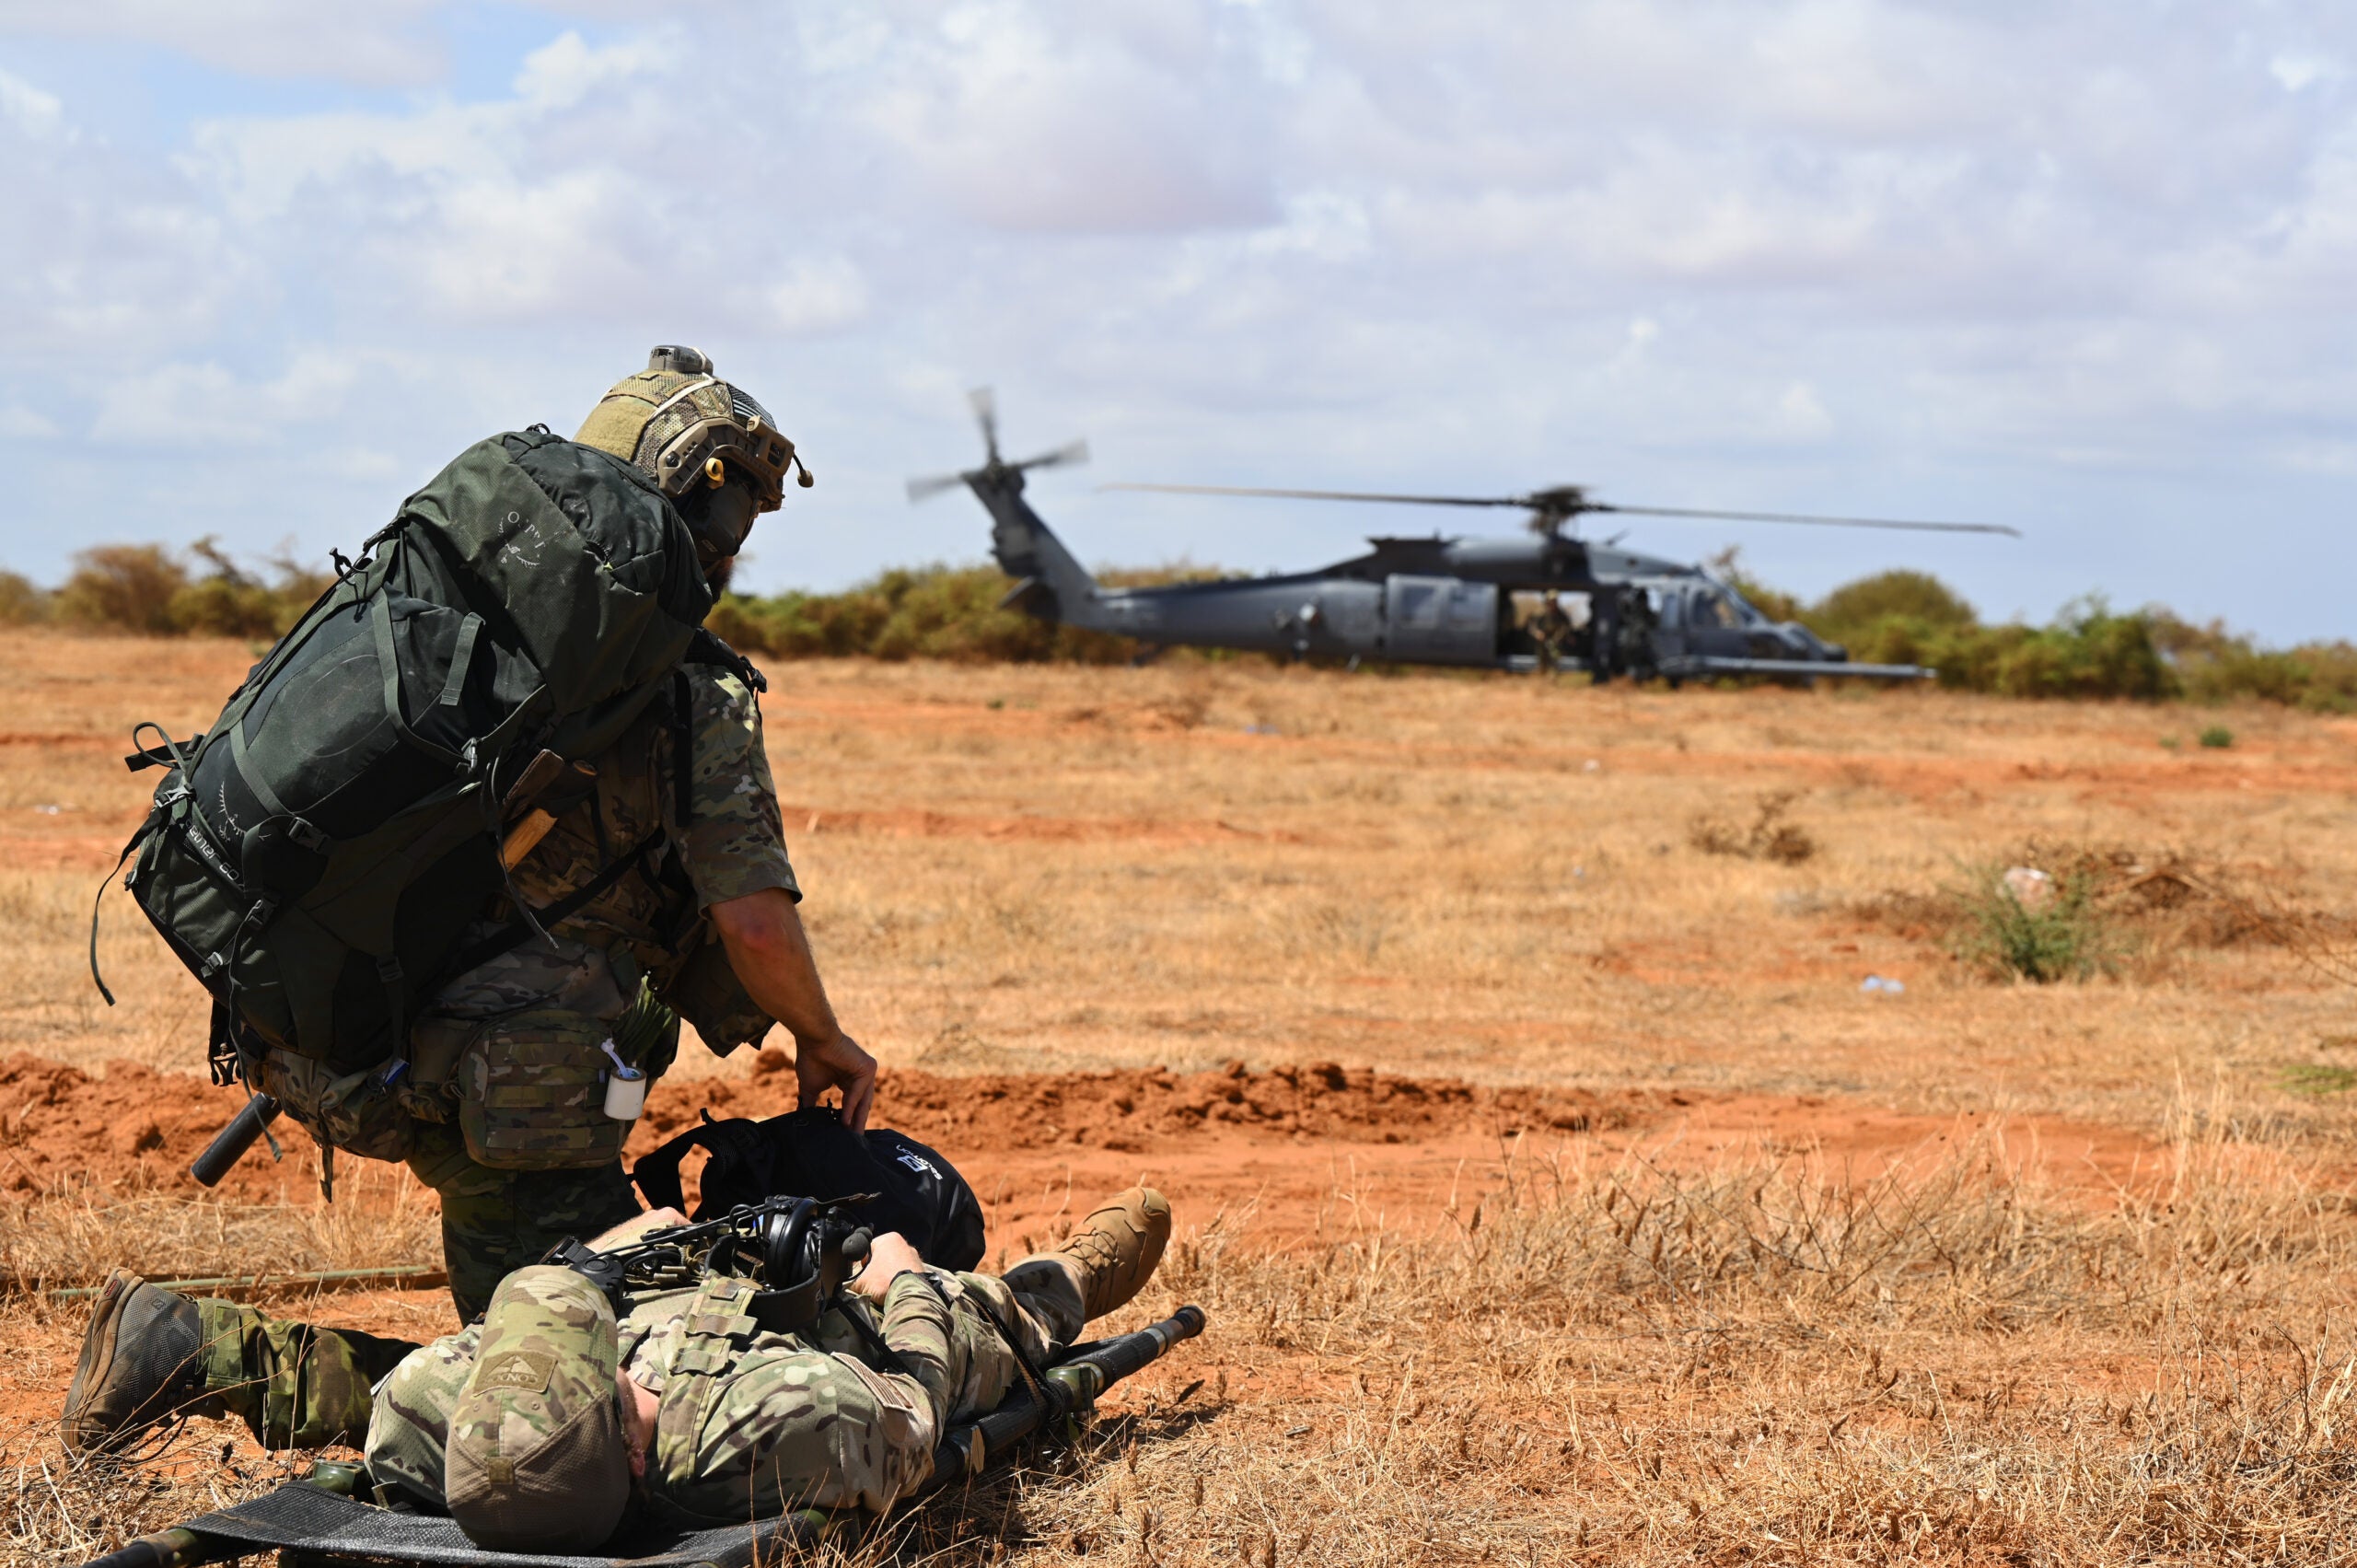 A U.S. Pararescueman prepares to move a simulated casualty to a HH-60W combat rescue helicopter during a casualty evacuation (CASEVAC) exercise while his teammates secure the perimeter at an undisclosed Combined Joint Task Force-Horn of Africa area of responsibility, Dec 8, 2022. Conducting CASEVAC exercises prepares rescue personnel for any humanitarian or crisis response scenario, regardless of the time and place, as well as the availability of stable medical facilities. (U.S. Air Force photo by Tech. Sgt. Jayson Burns)